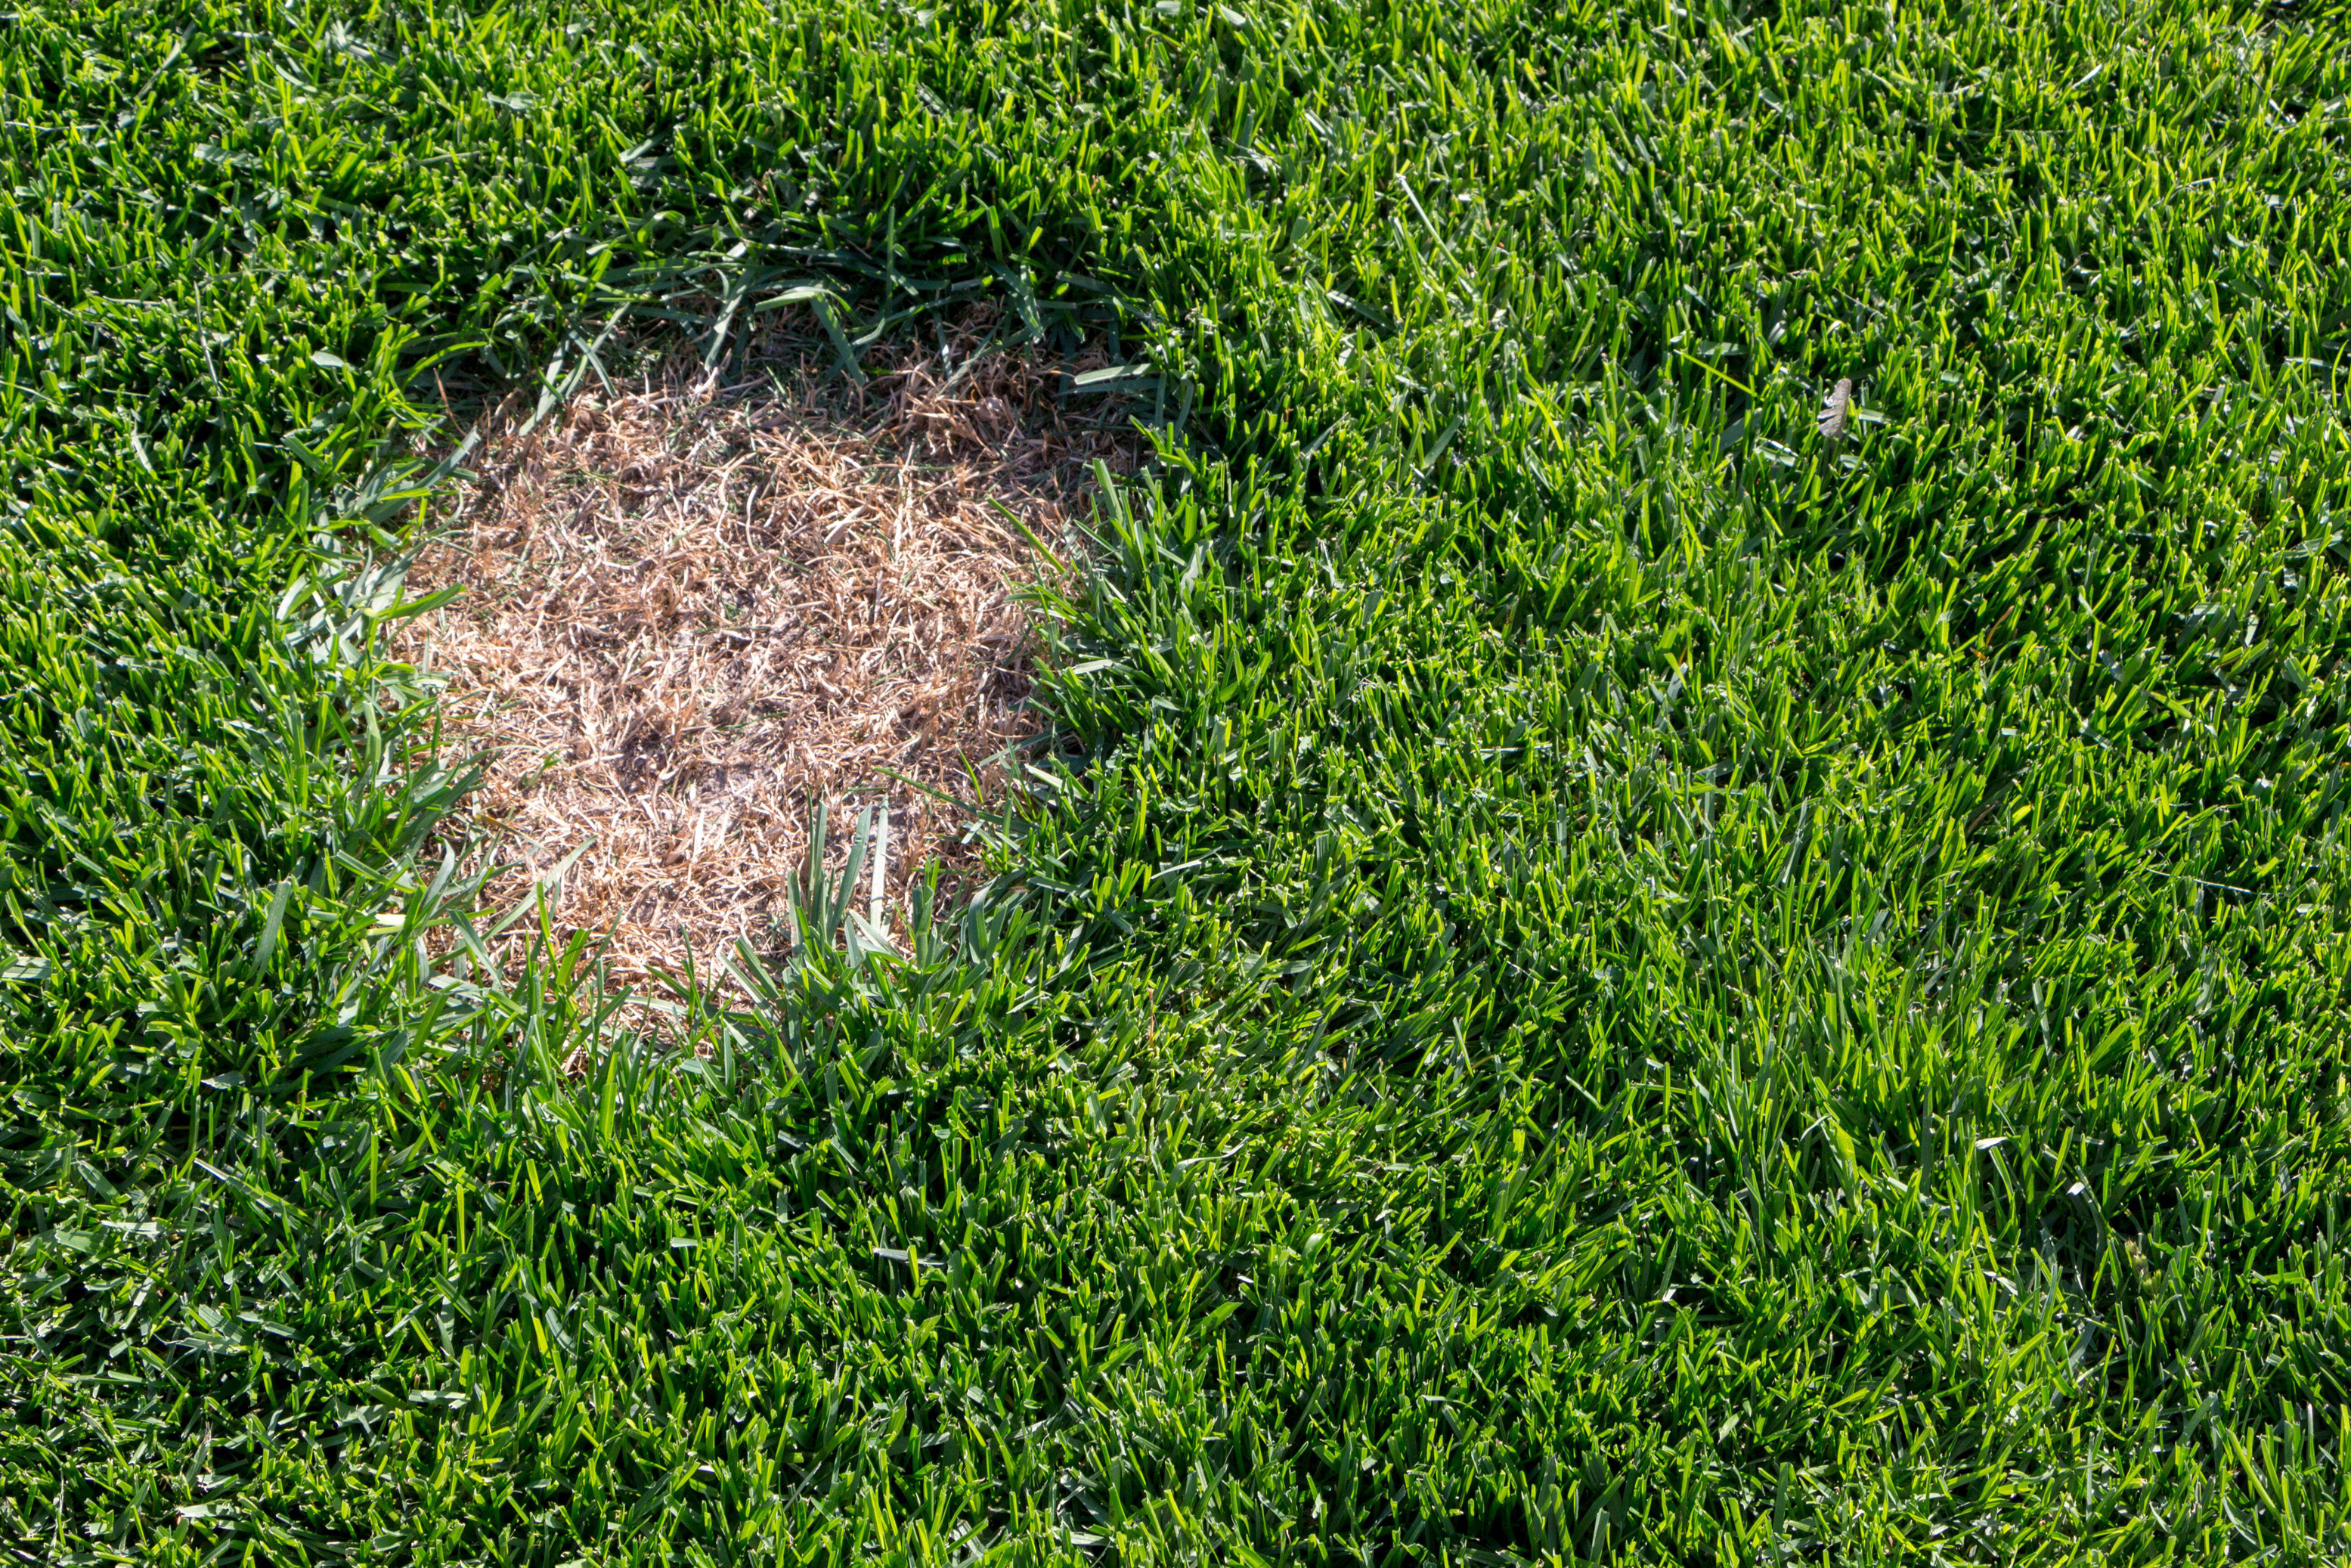 Bare patch in grass (Alamy/PA)